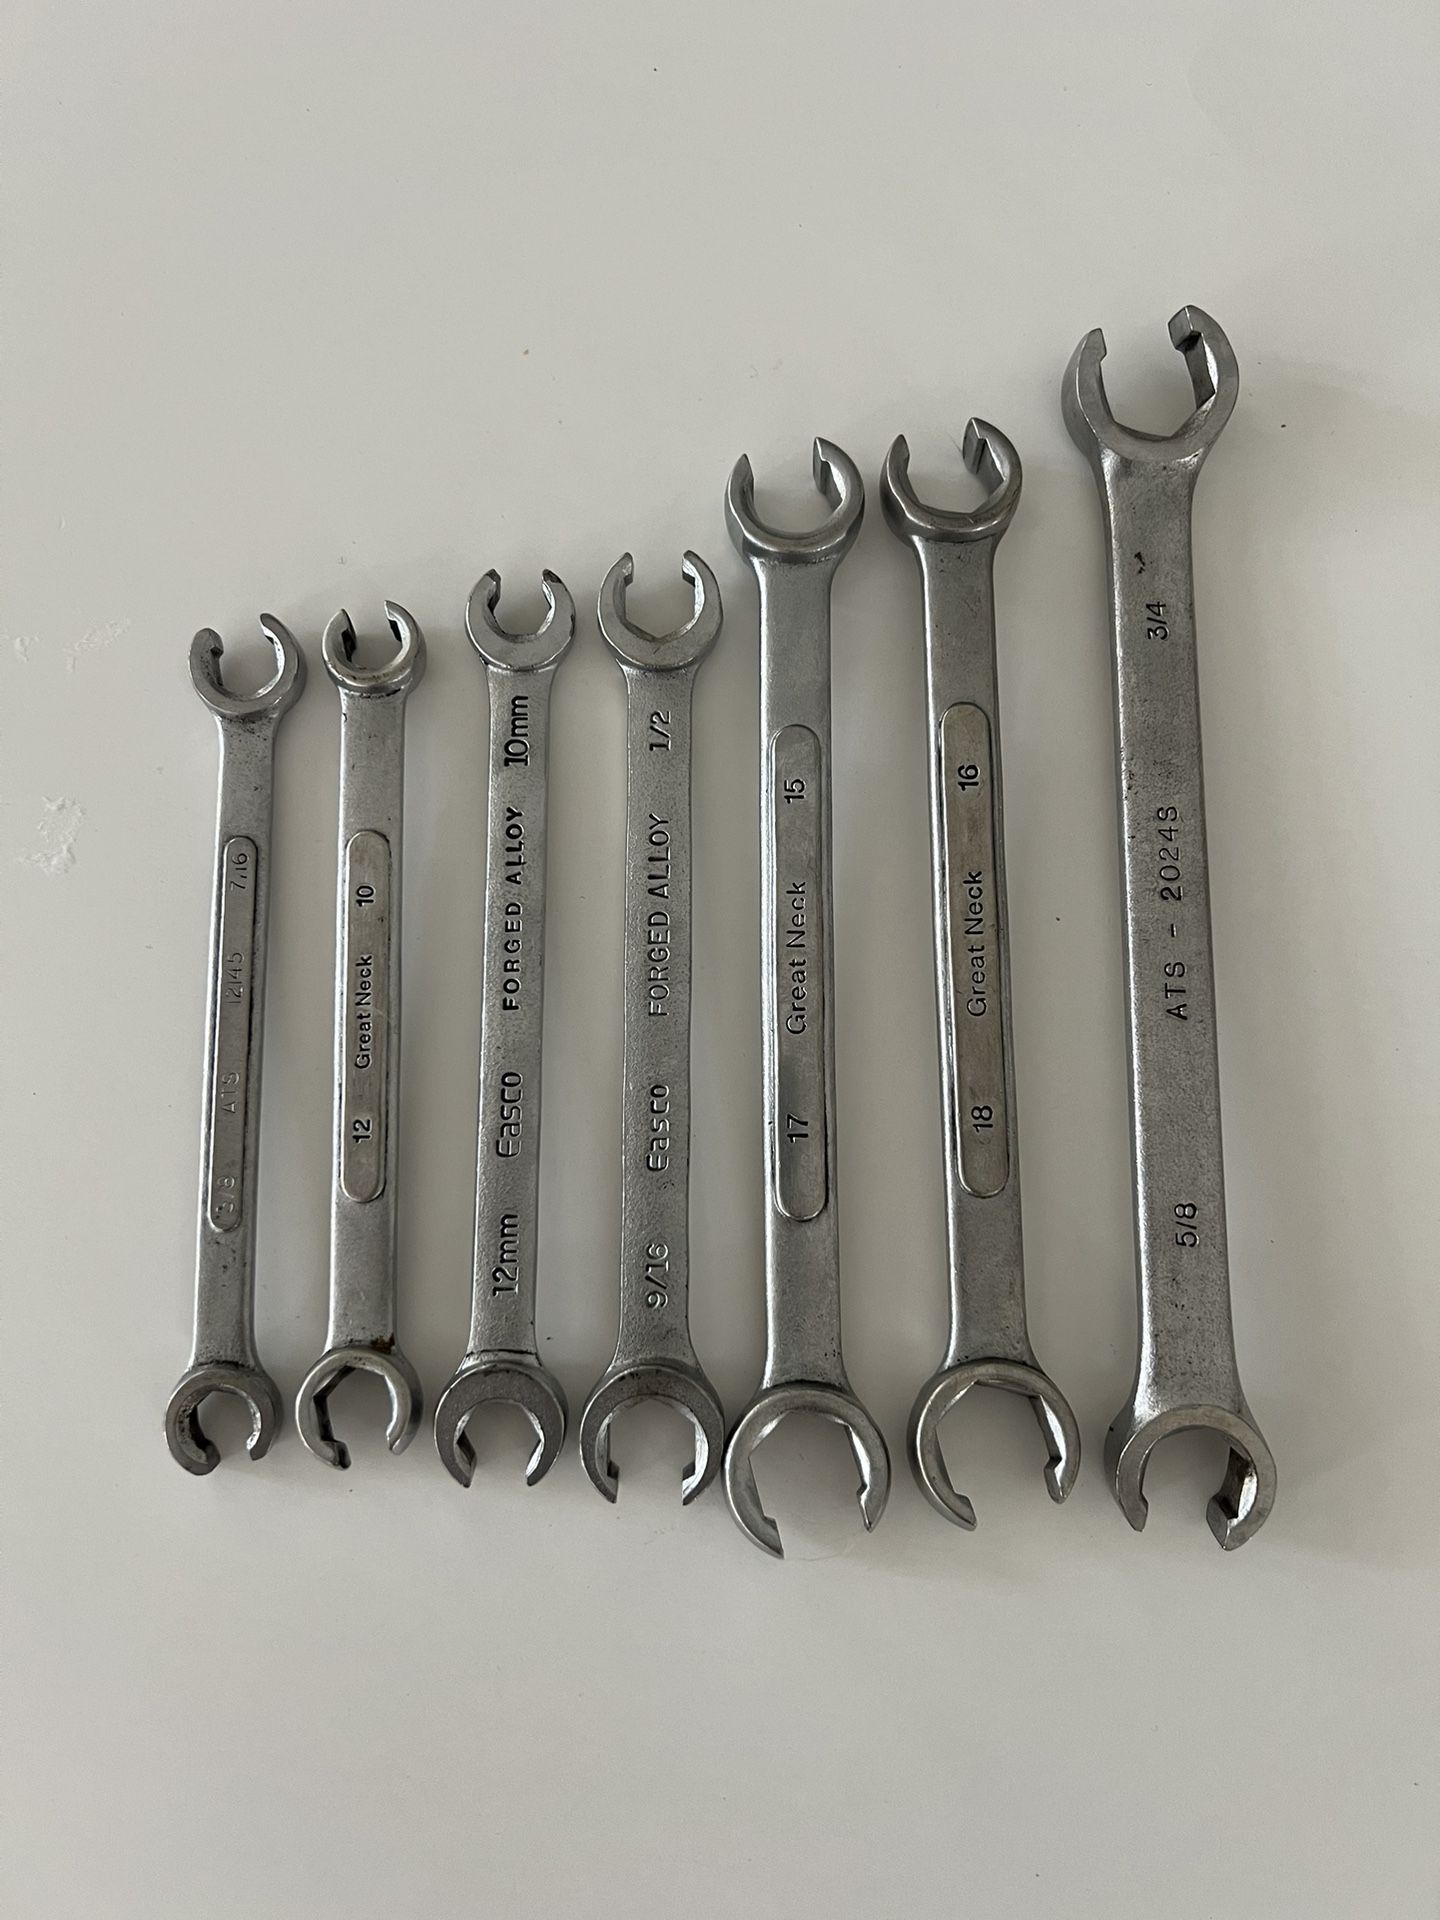 Bundle of Flare Nut Combination Wrench’s ( Lot of 7)